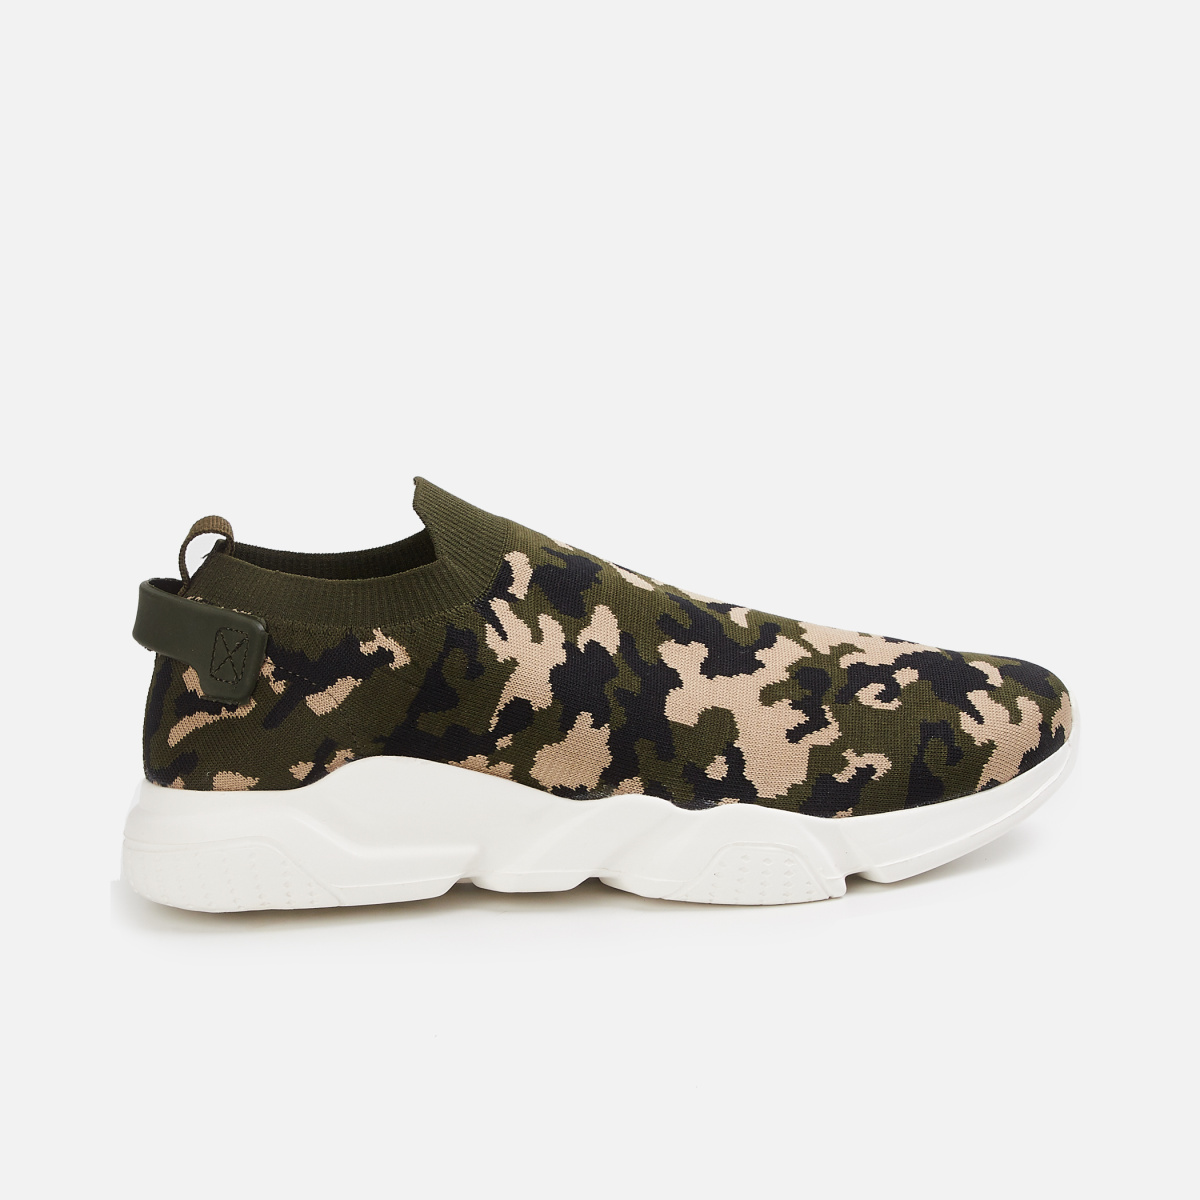 FORCA Men Camouflage Slip-On Shoes